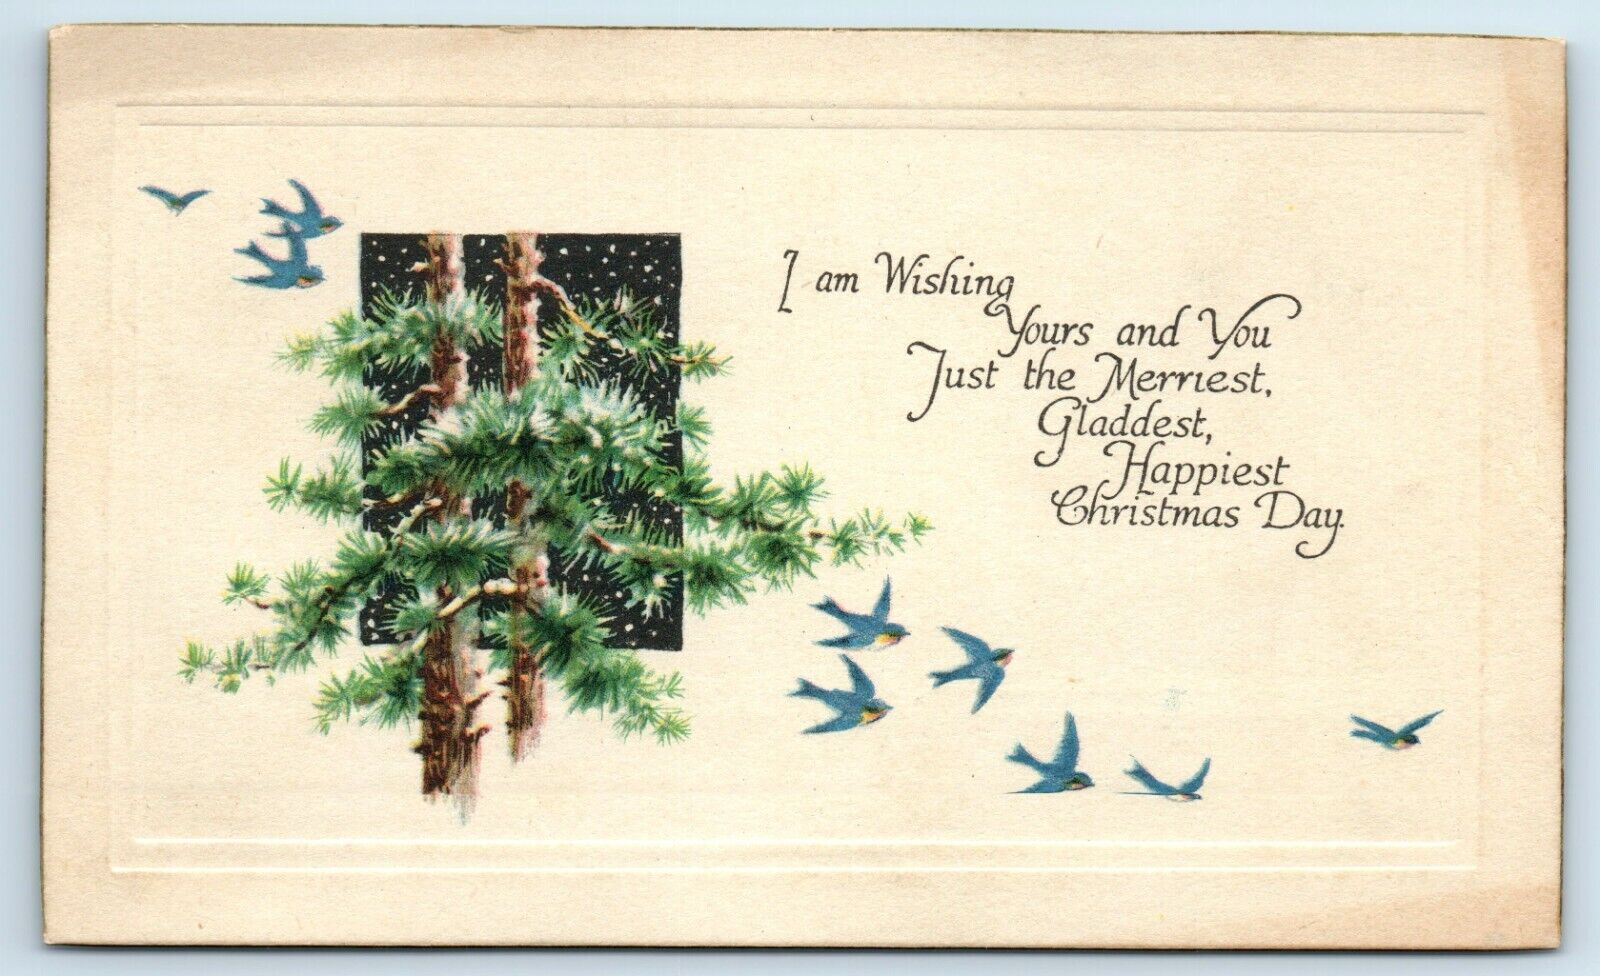 Postcard Wishing You Just the Merriest, Christmas Day greetings birds J97